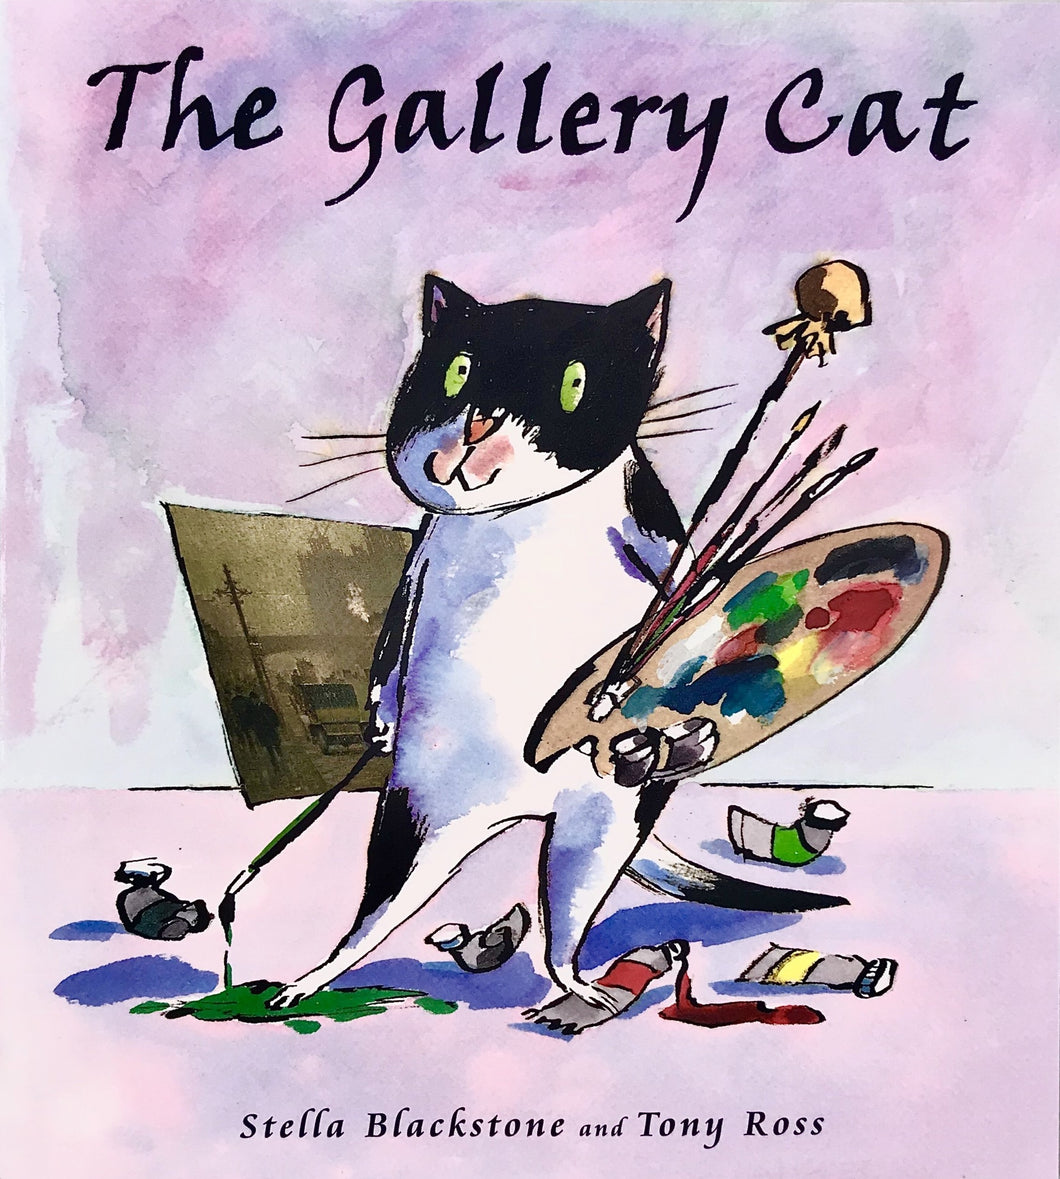 The Gallery Cat